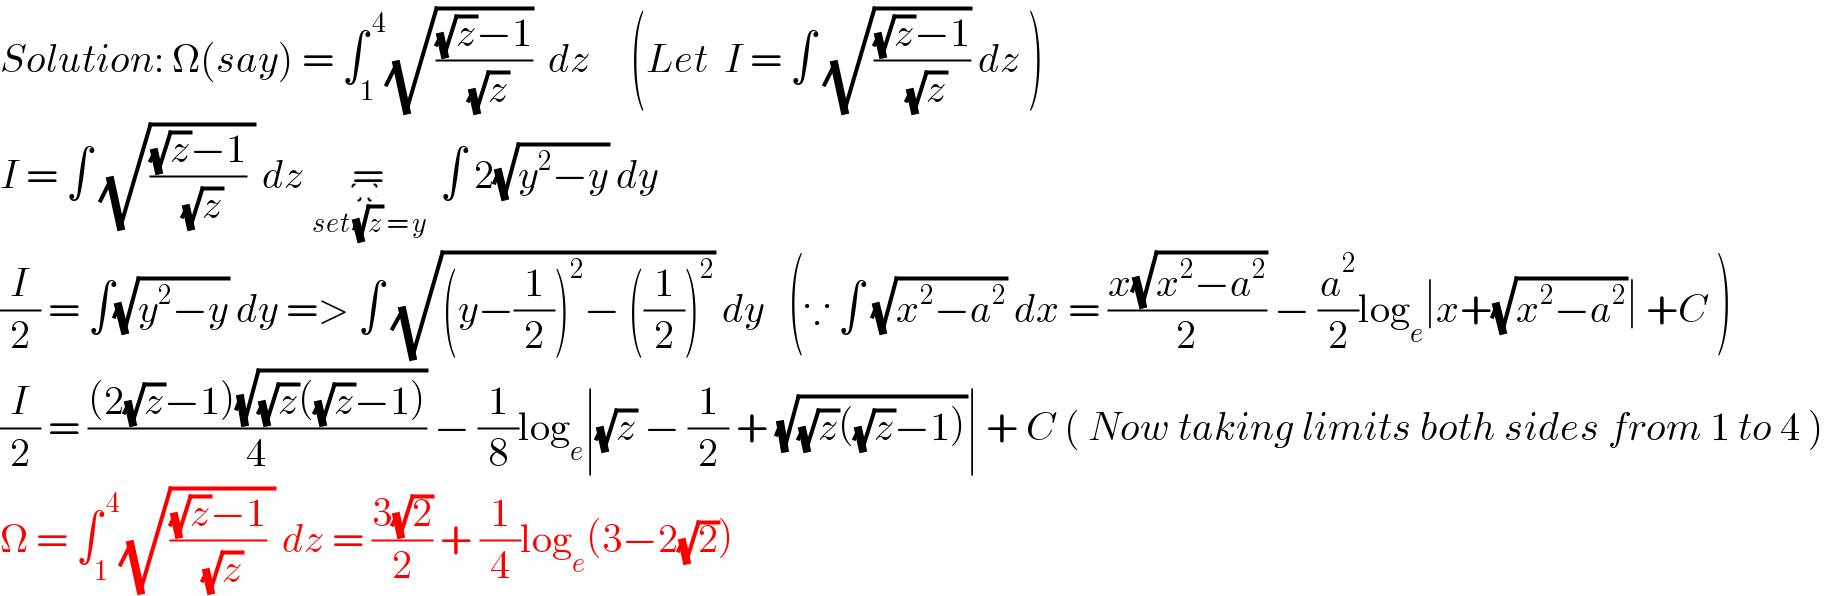 Solution: Ω(say) = ∫_1 ^( 4) (√(((√z)−1)/( (√z))))  dz     (Let  I = ∫ (√(((√z)−1)/( (√z)))) dz )  I = ∫ (√((((√z)−1)/( (√z))) )) dz =_(set (√z) = y)        ∫ 2(√(y^2 −y)) dy  (I/2) = ∫(√(y^2 −y)) dy => ∫ (√((y−(1/2))^2 − ((1/2))^2 )) dy   (∵ ∫ (√(x^2 −a^2 )) dx = ((x(√(x^2 −a^2 )))/2) − (a^2 /2)log_e ∣x+(√(x^2 −a^2 ))∣ +C )  (I/2) = (((2(√z)−1)(√((√z)((√z)−1))))/4) − (1/8)log_e ∣(√z) − (1/2) + (√((√z)((√z)−1)))∣ + C ( Now taking limits both sides from 1 to 4 )  Ω = ∫_1 ^( 4) (√((((√z)−1)/( (√z))) )) dz = ((3(√2))/2) + (1/4)log_e (3−2(√2))  